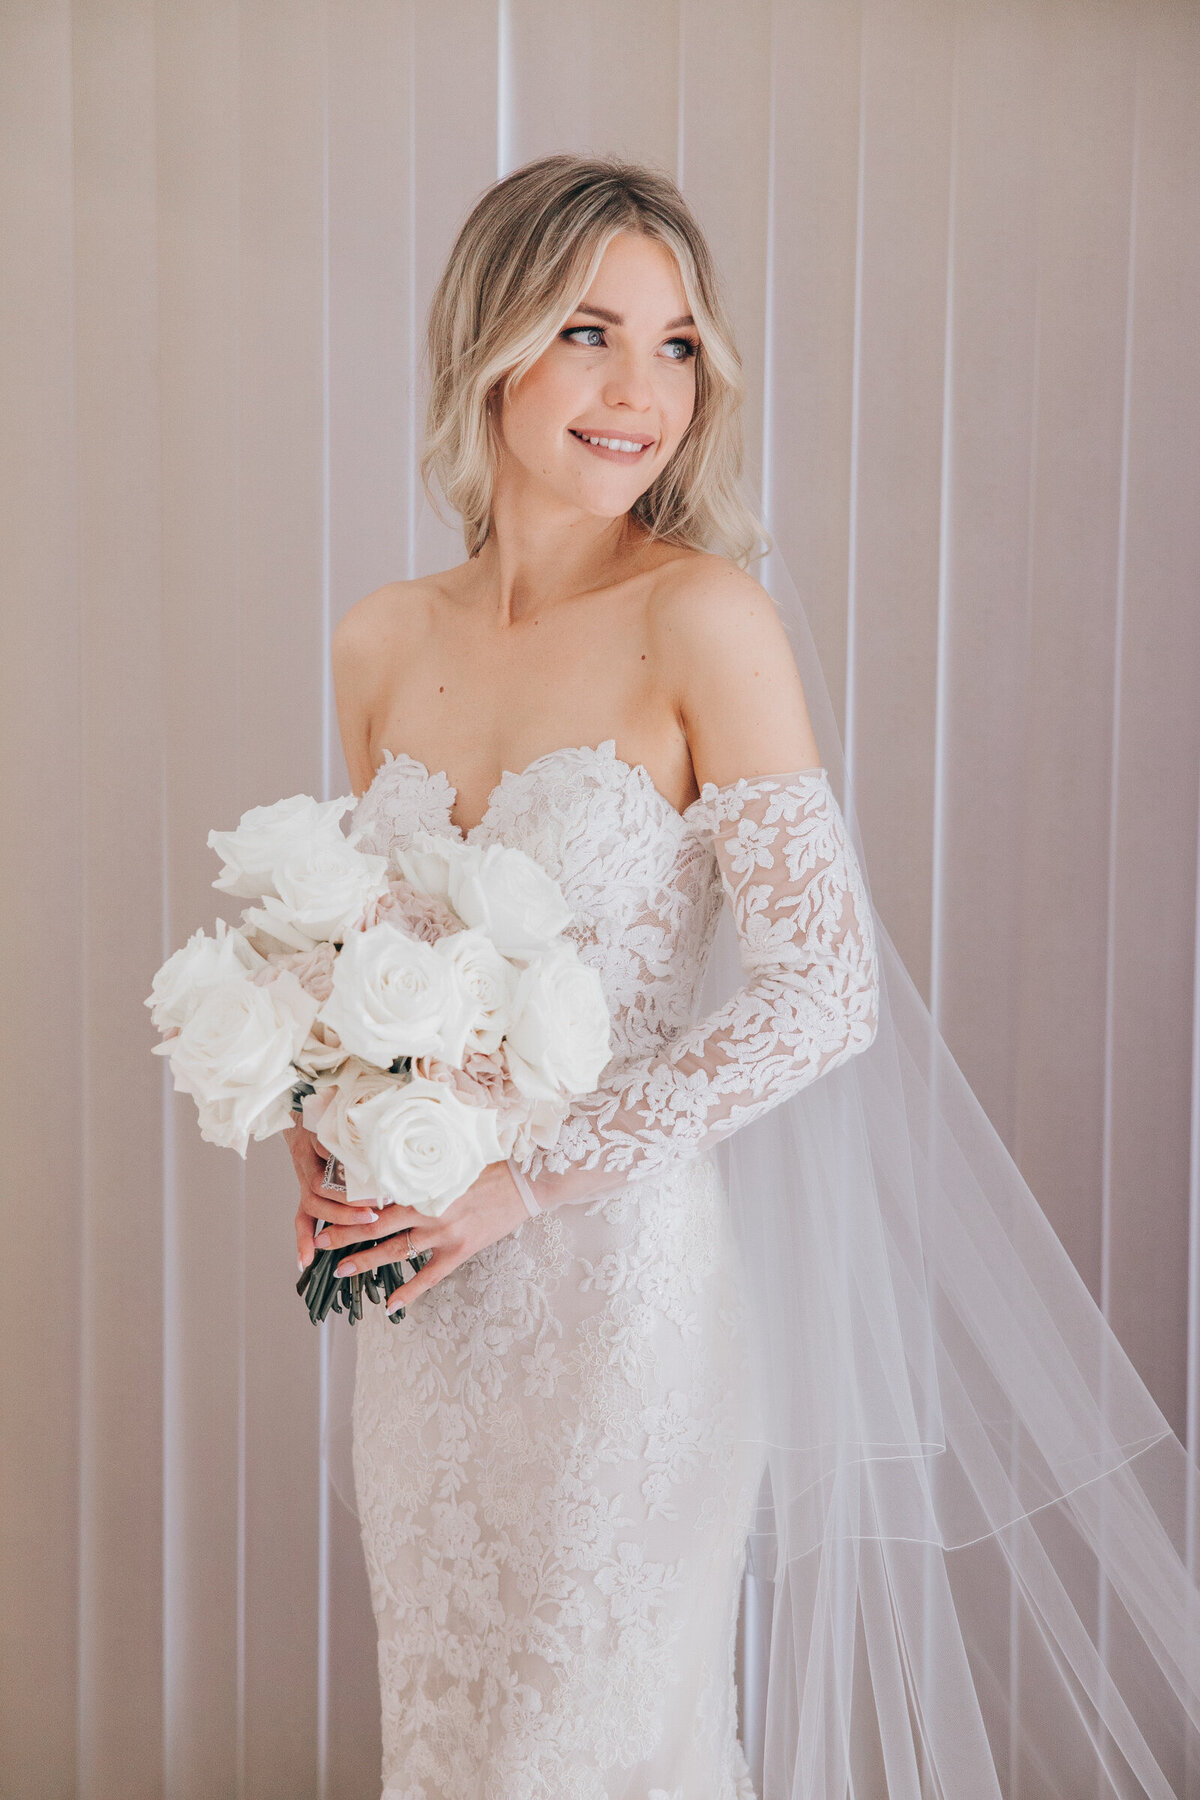 Luxurious bridal portraits of bride holding gorgeous bouquet of white and pink roses